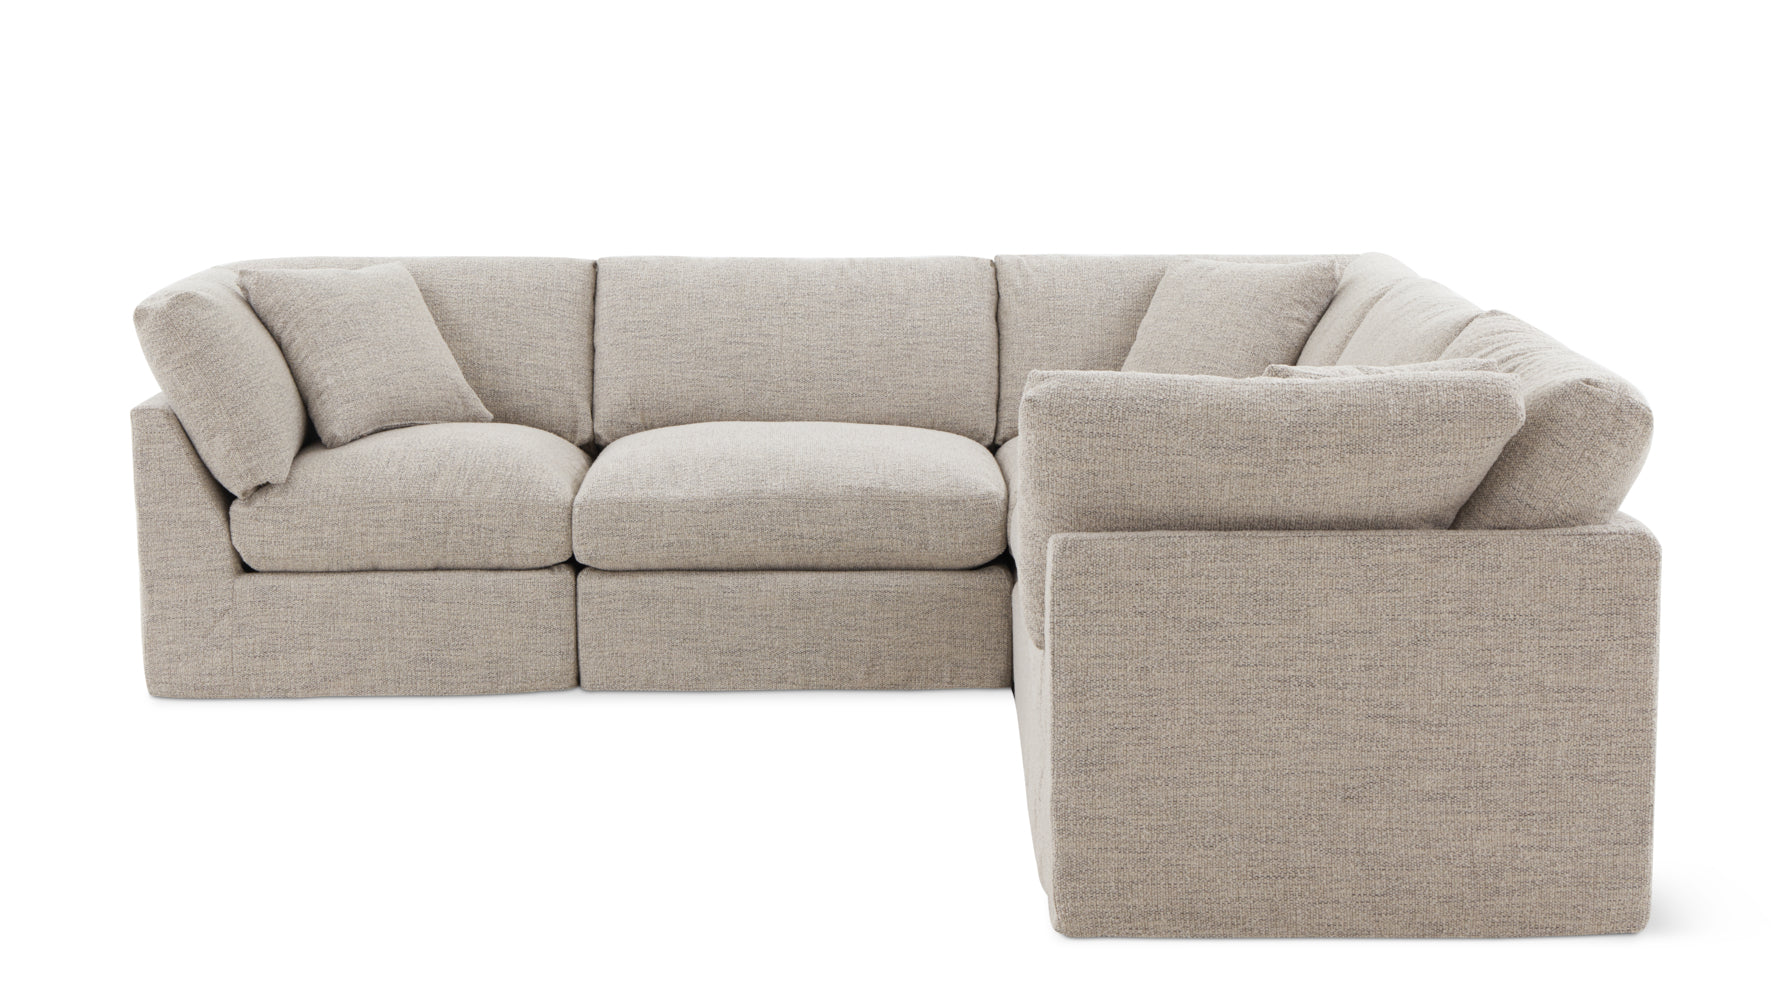 Get Together™ 5-Piece Modular Sectional Closed, Standard, Oatmeal - Image 1